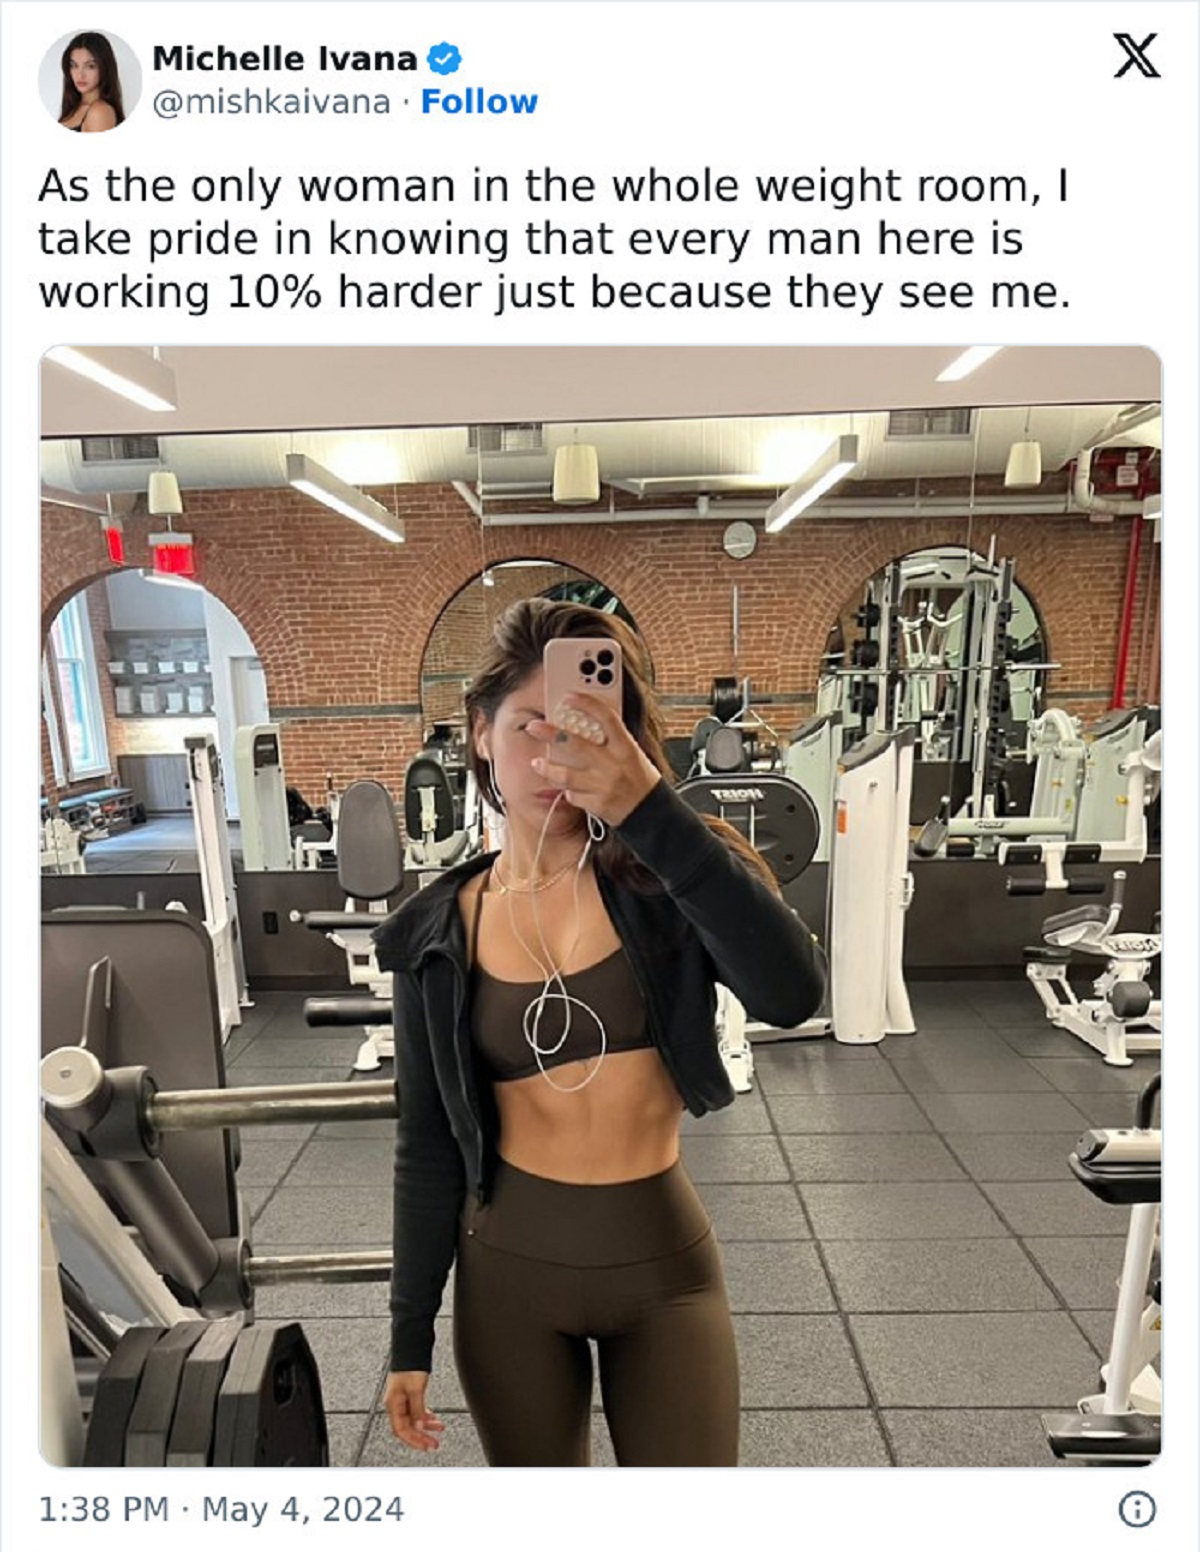 gym - Michelle Ivana As the only woman in the whole weight room, I take pride in knowing that every man here is working 10% harder just because they see me. T